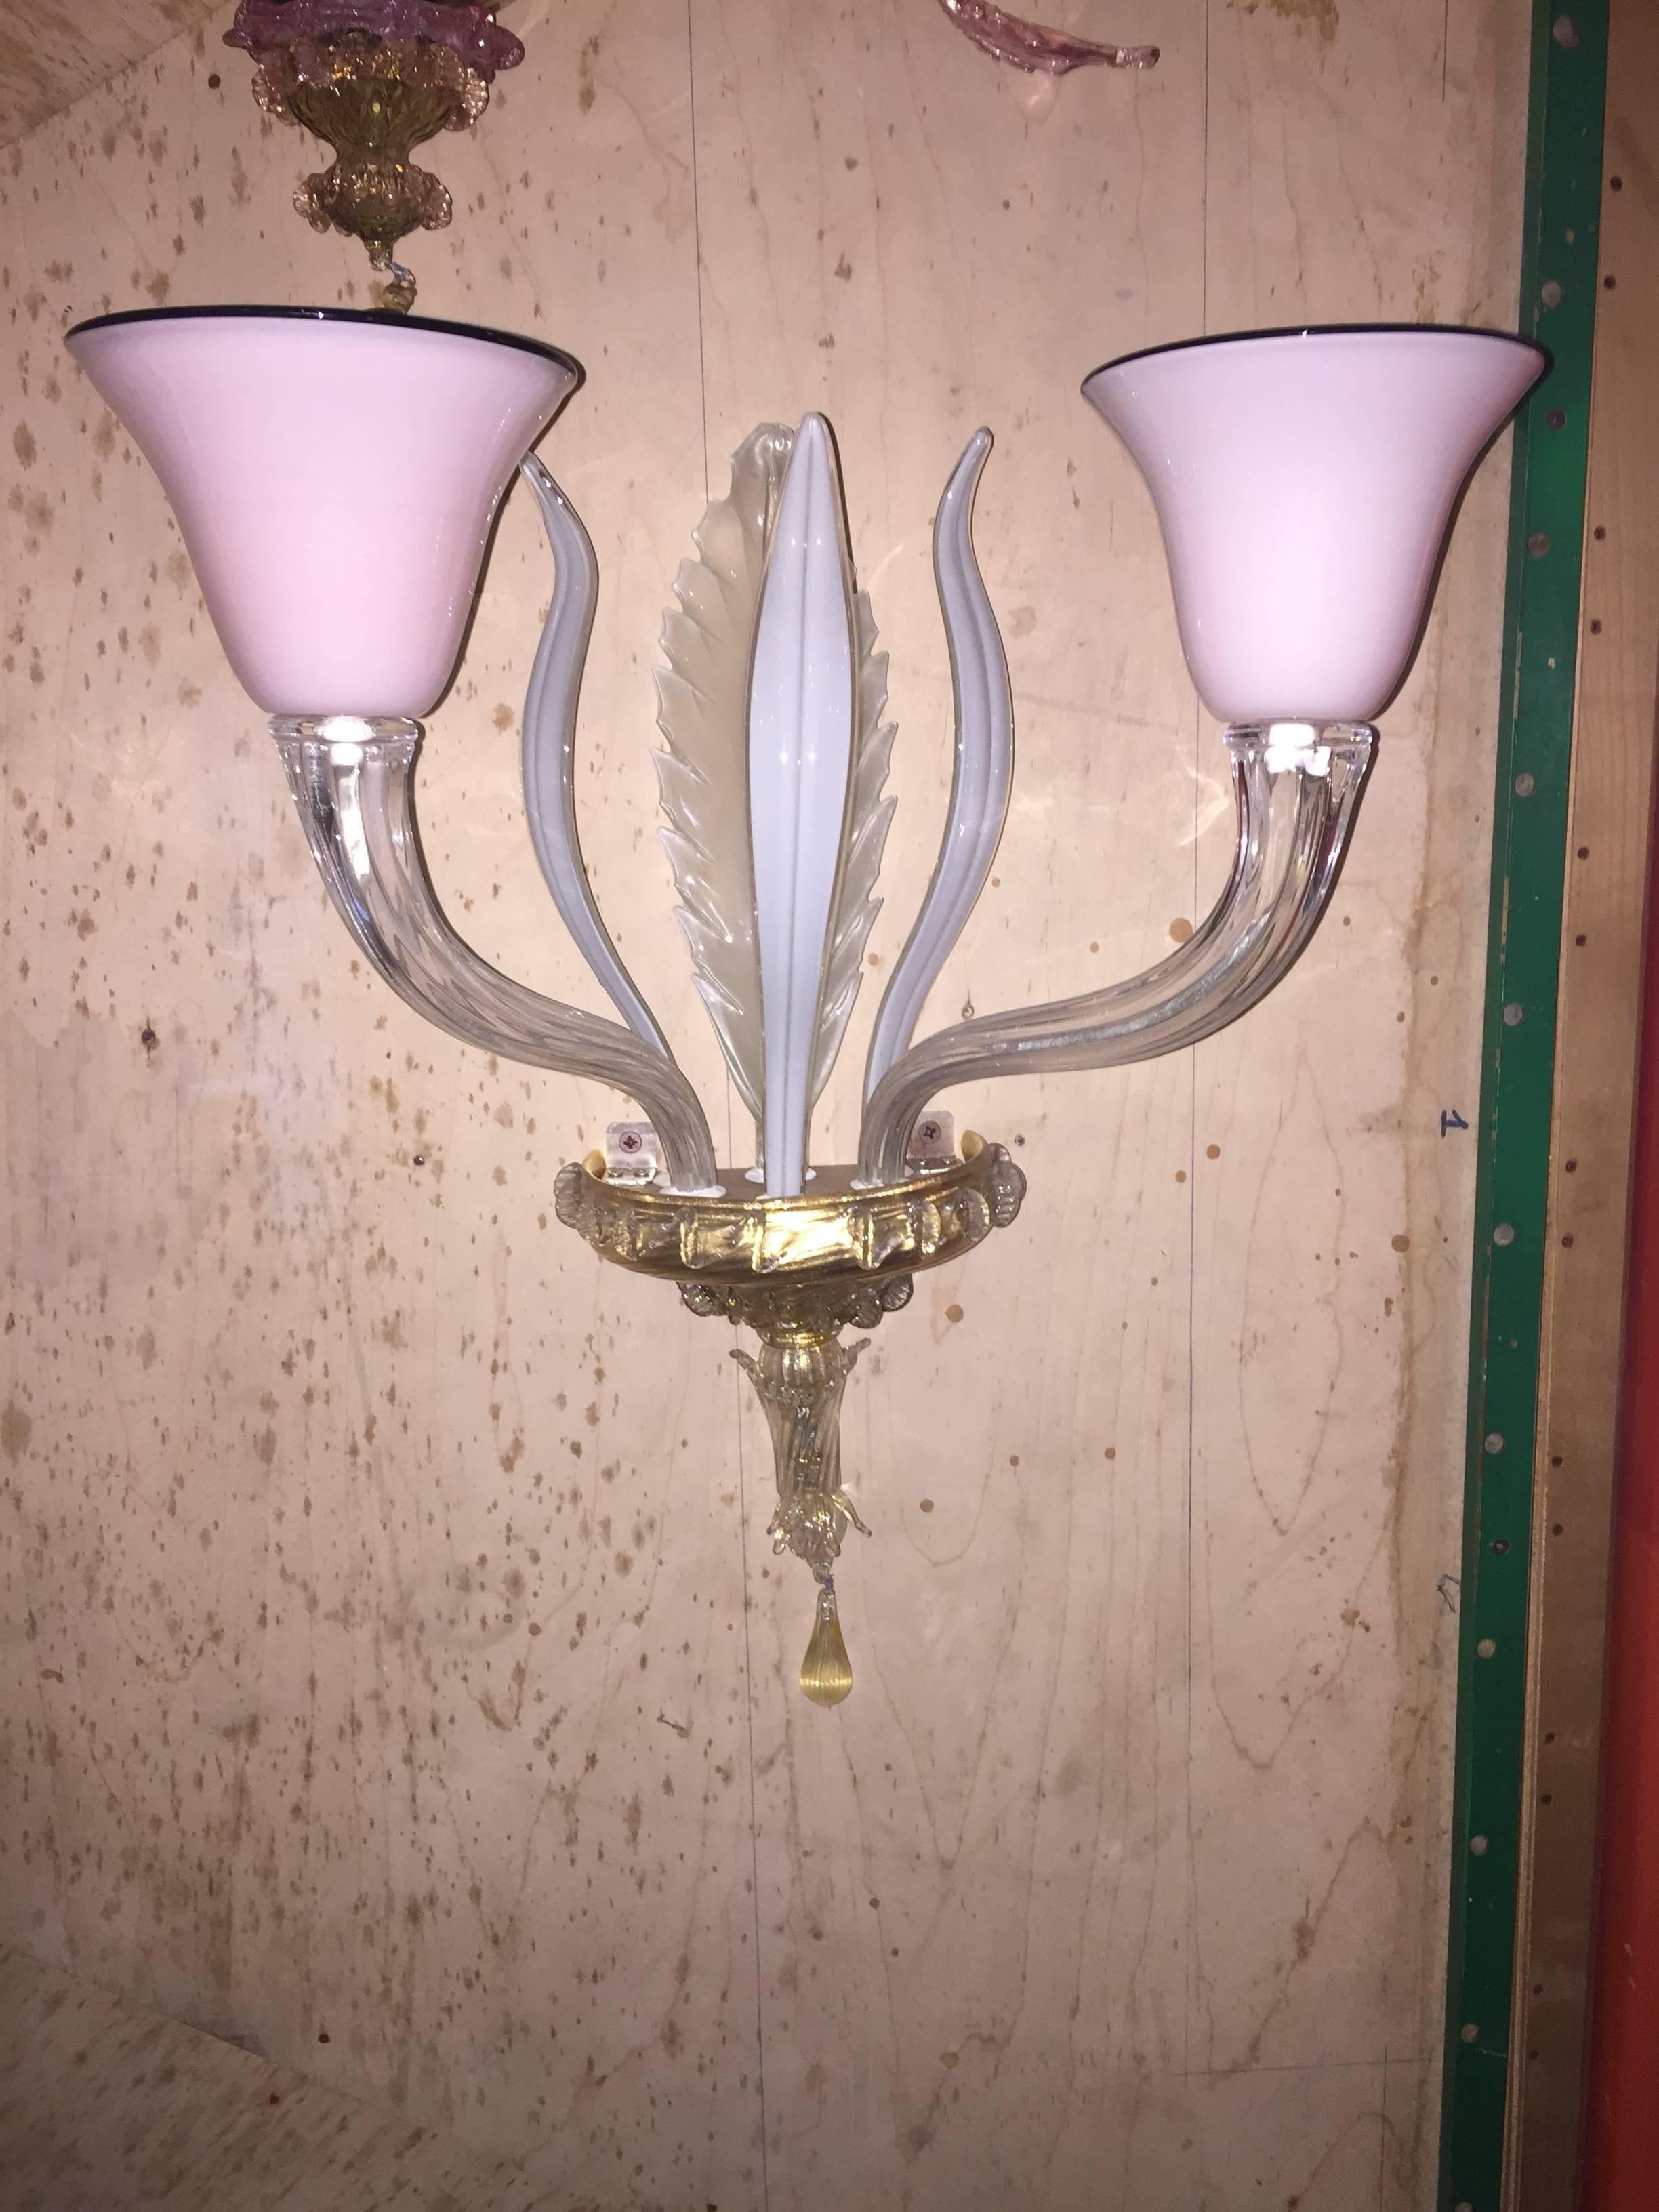 A beautiful two arms Murano glass sconce made by Salviati glass factory.

Check other beautiful items in our storefront page.